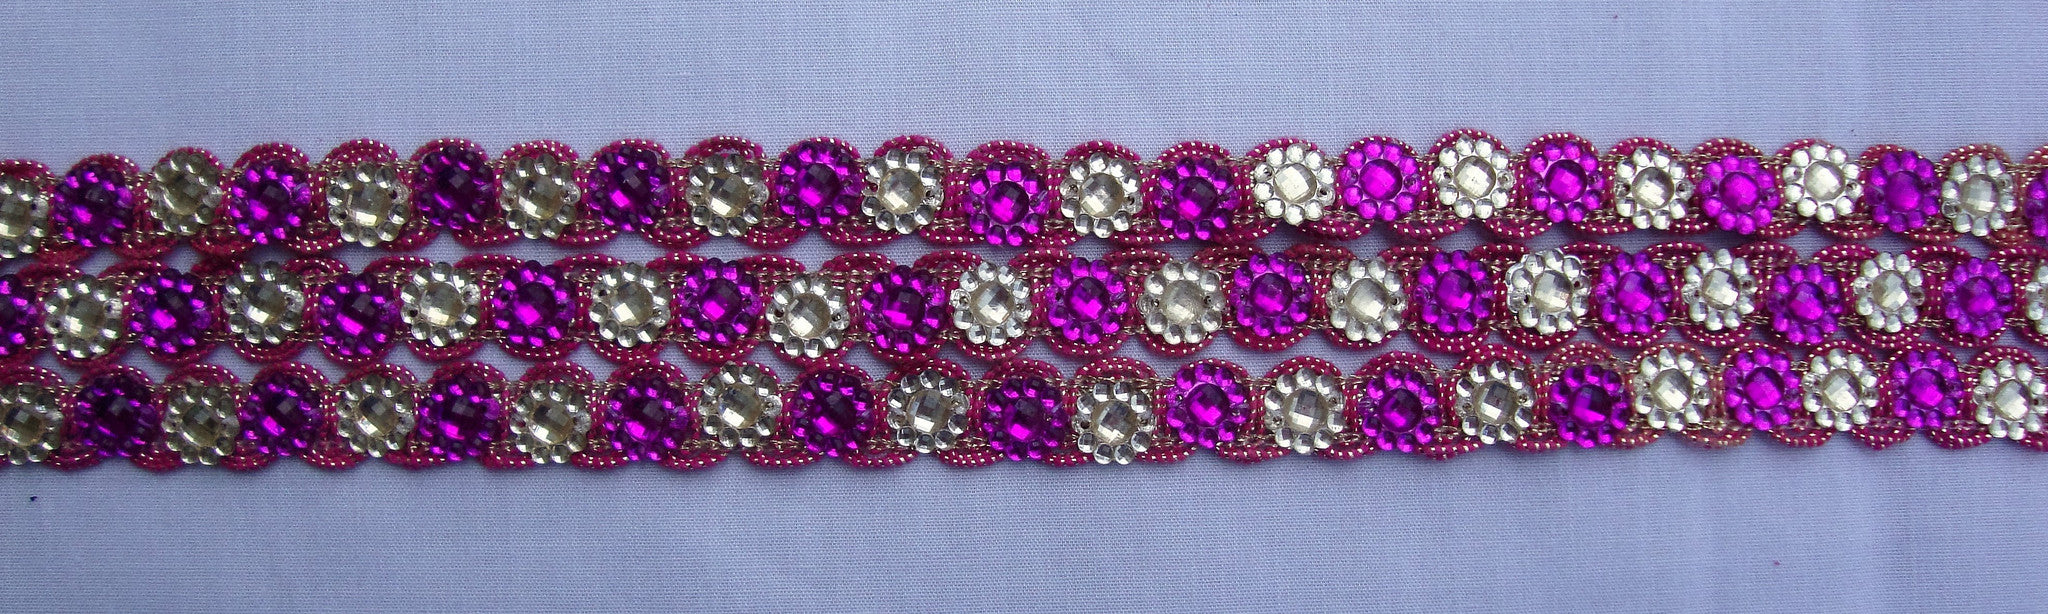 Purple Beaded Trimming (Sold as a 4.25 yard piece)